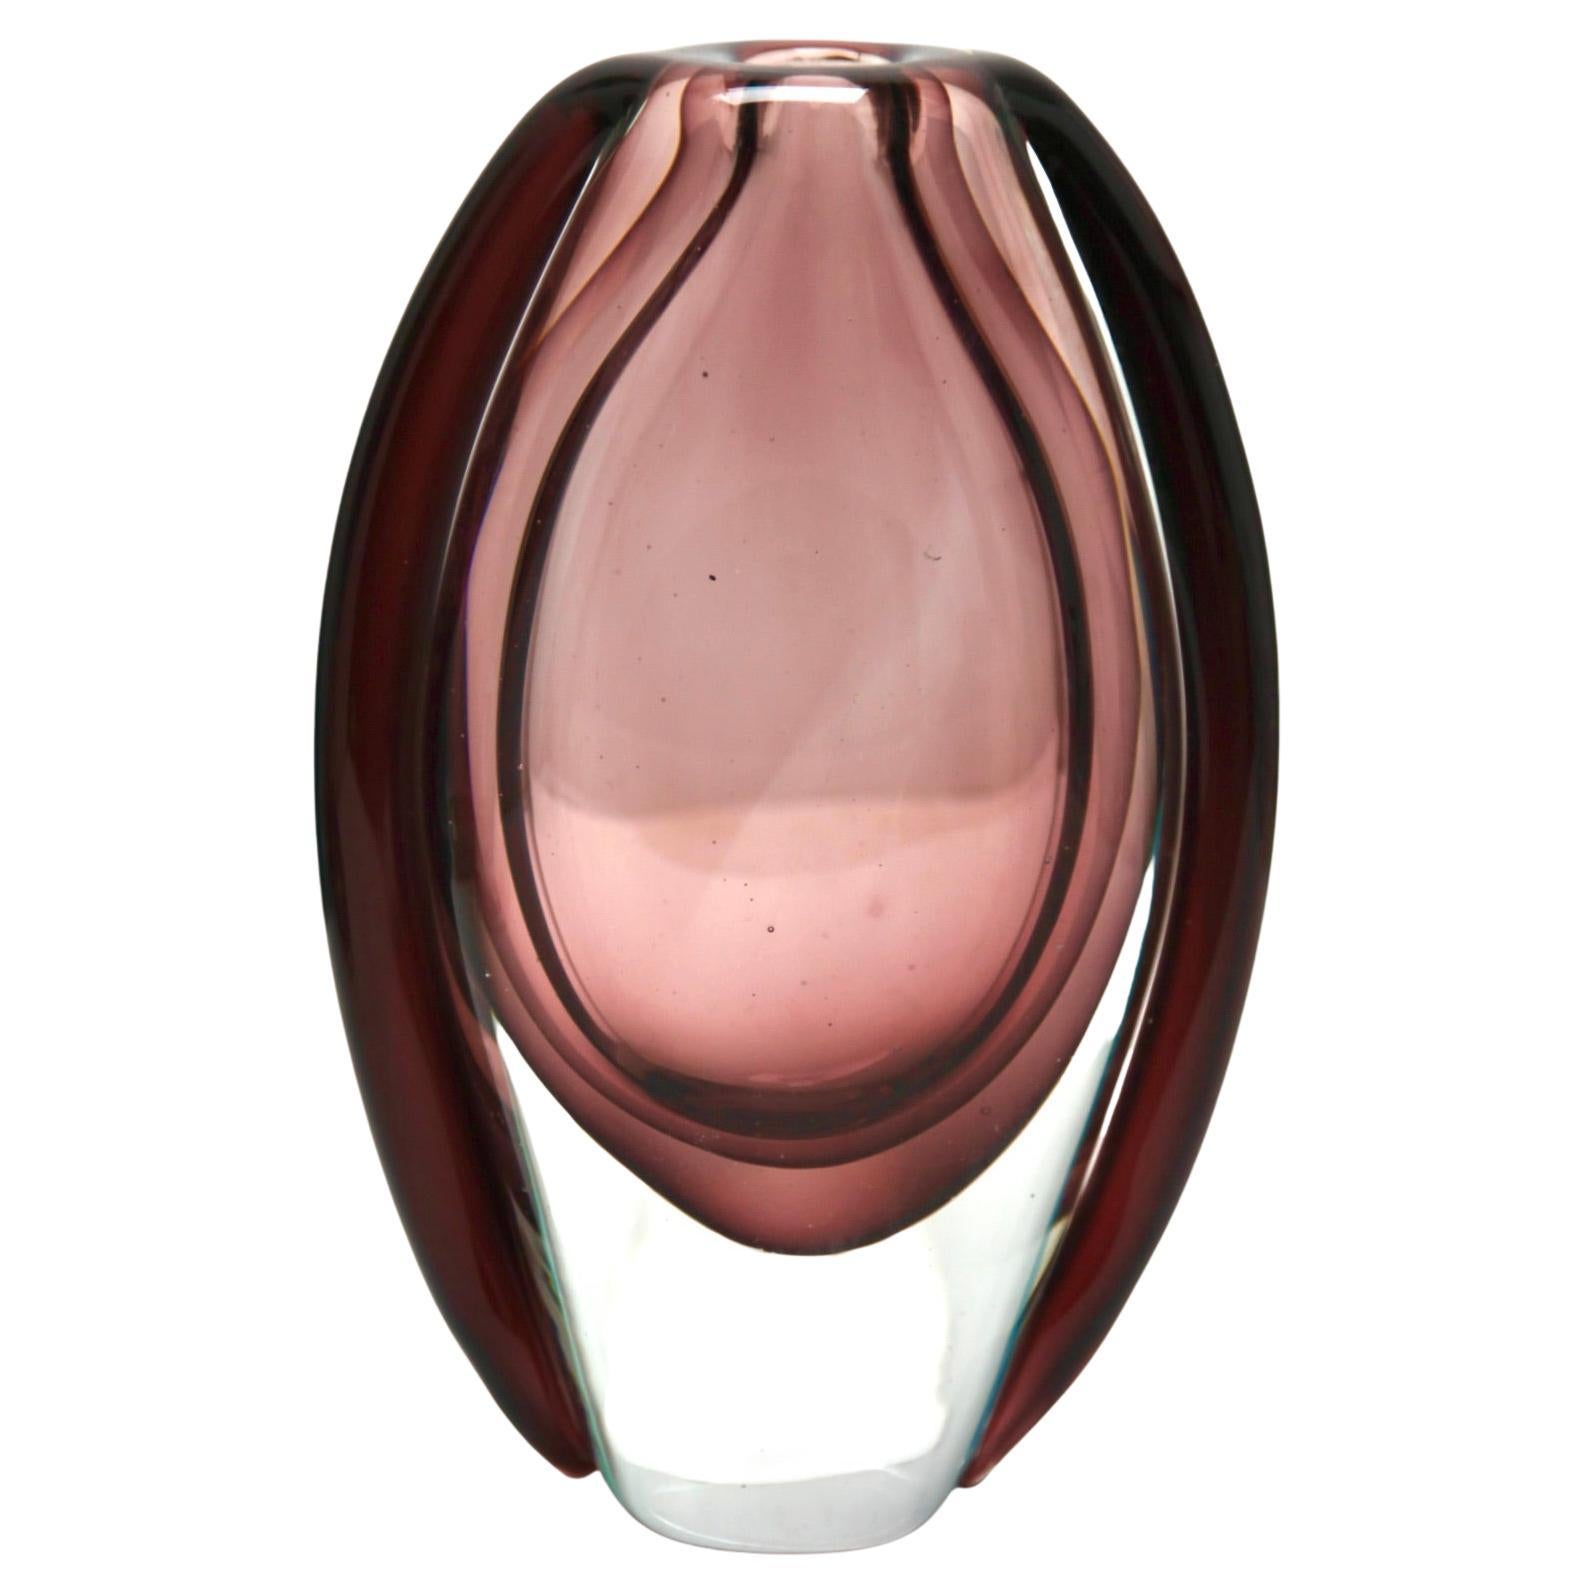 Murano Drop Vases Whit a Thick Sommerso 'Clear Glass Casing'